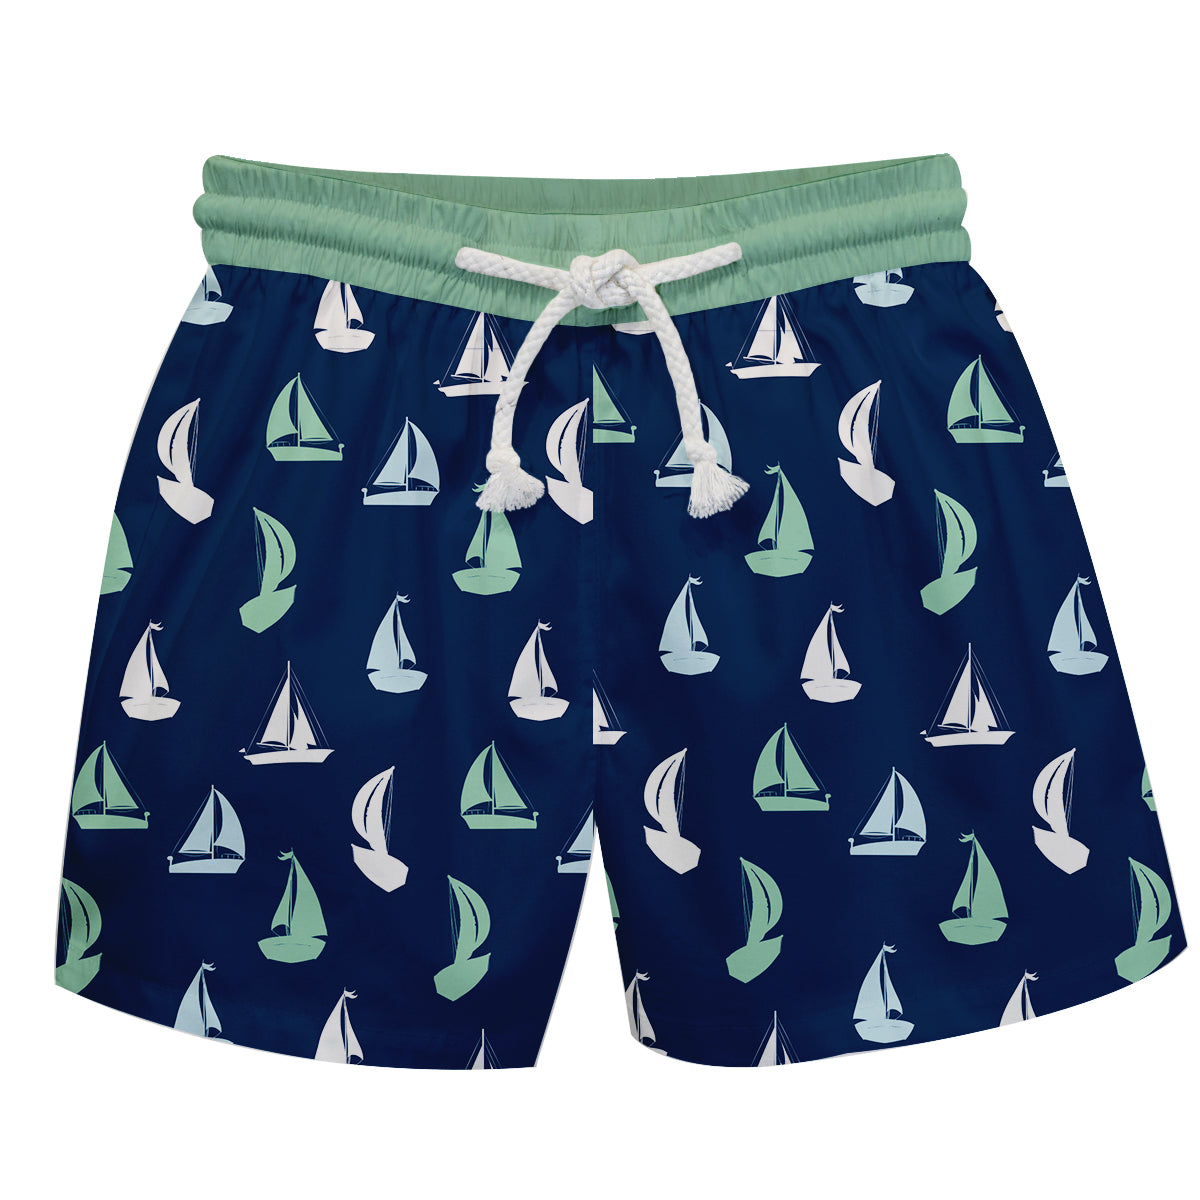 Boats Print Navy and Green Swimtrunk